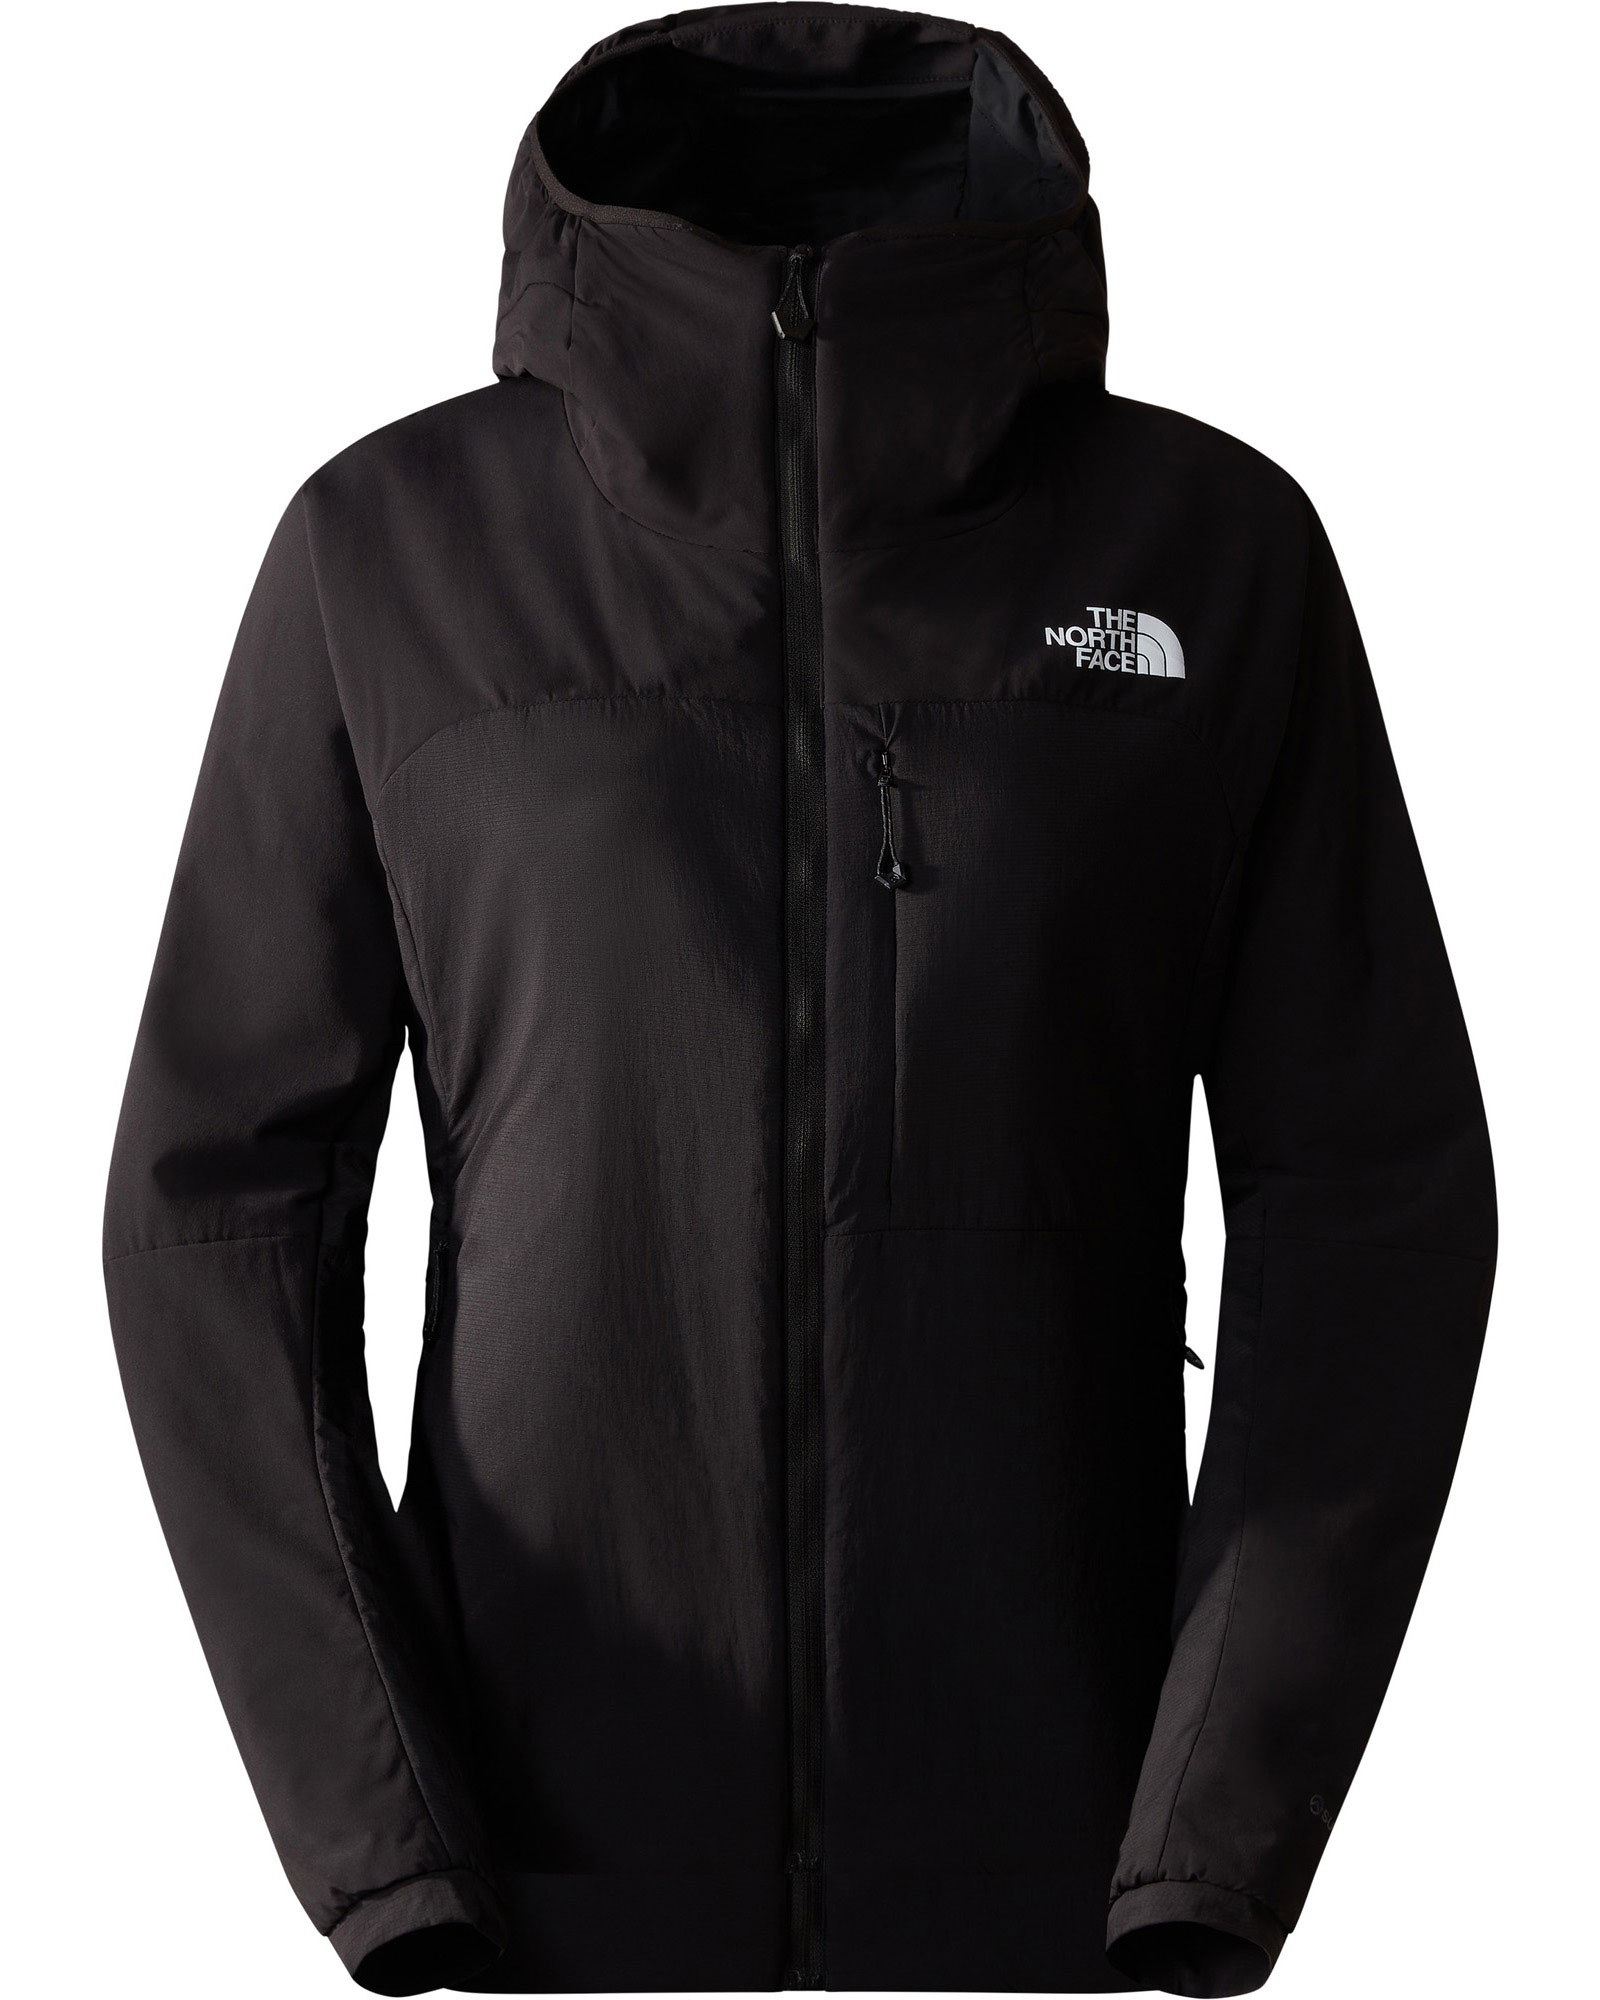 The North Face Summit Casaval Women's Hoodie 0